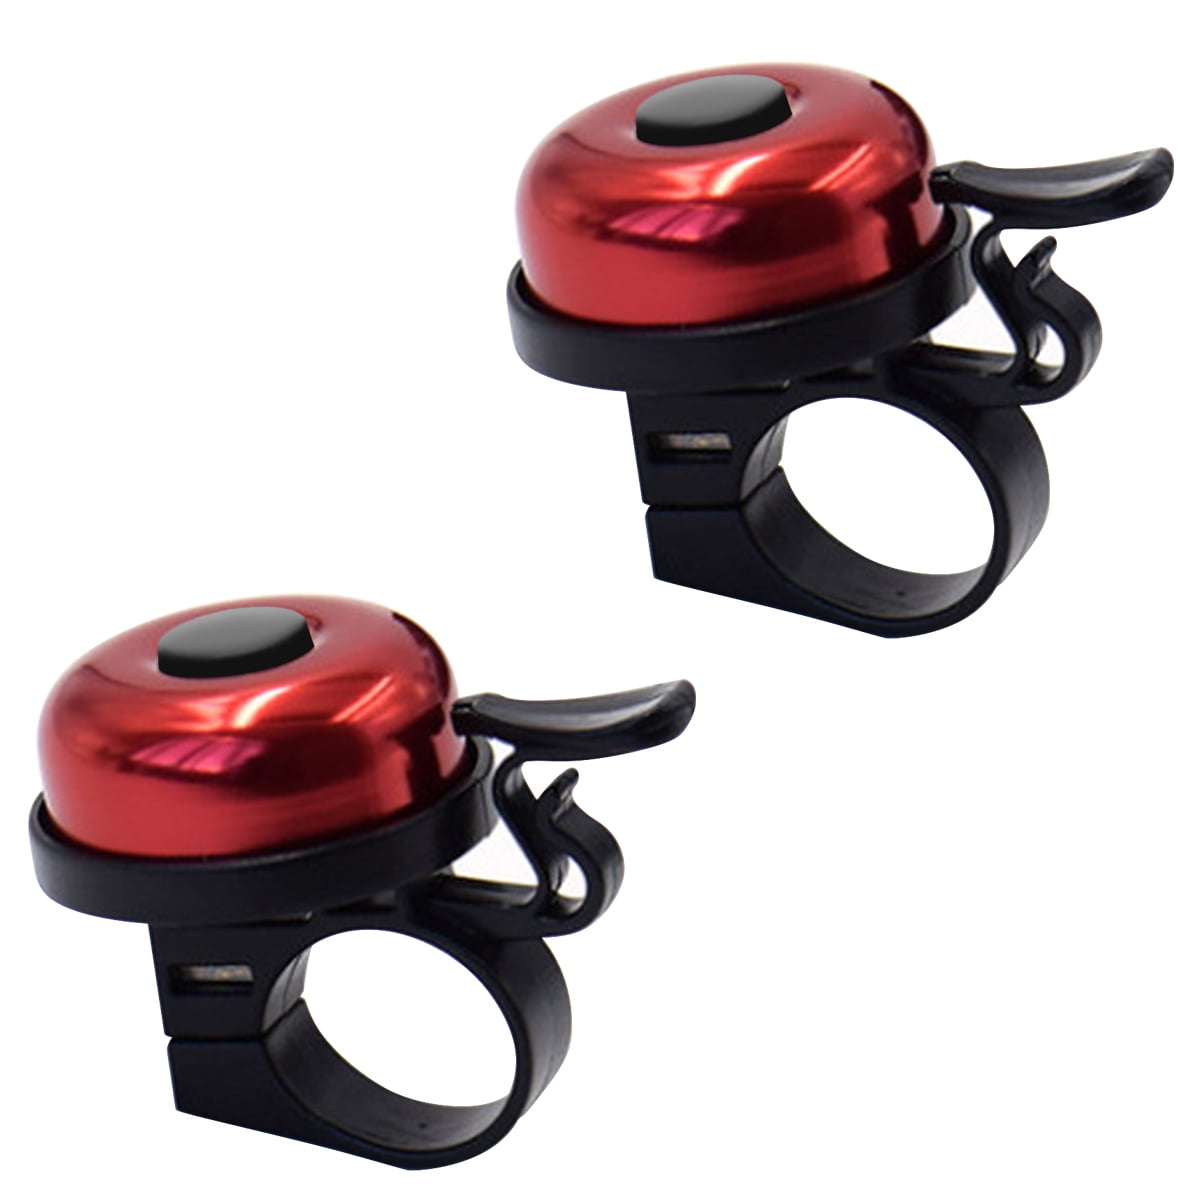 Cinvo Pack of 2 Bike Bells Kids Bicycle Ring Bell Loud Crisp Clear Sound Safe Cycling Aluminum Warning Scooter Tricycles Bell Flower Design for Kids Adults